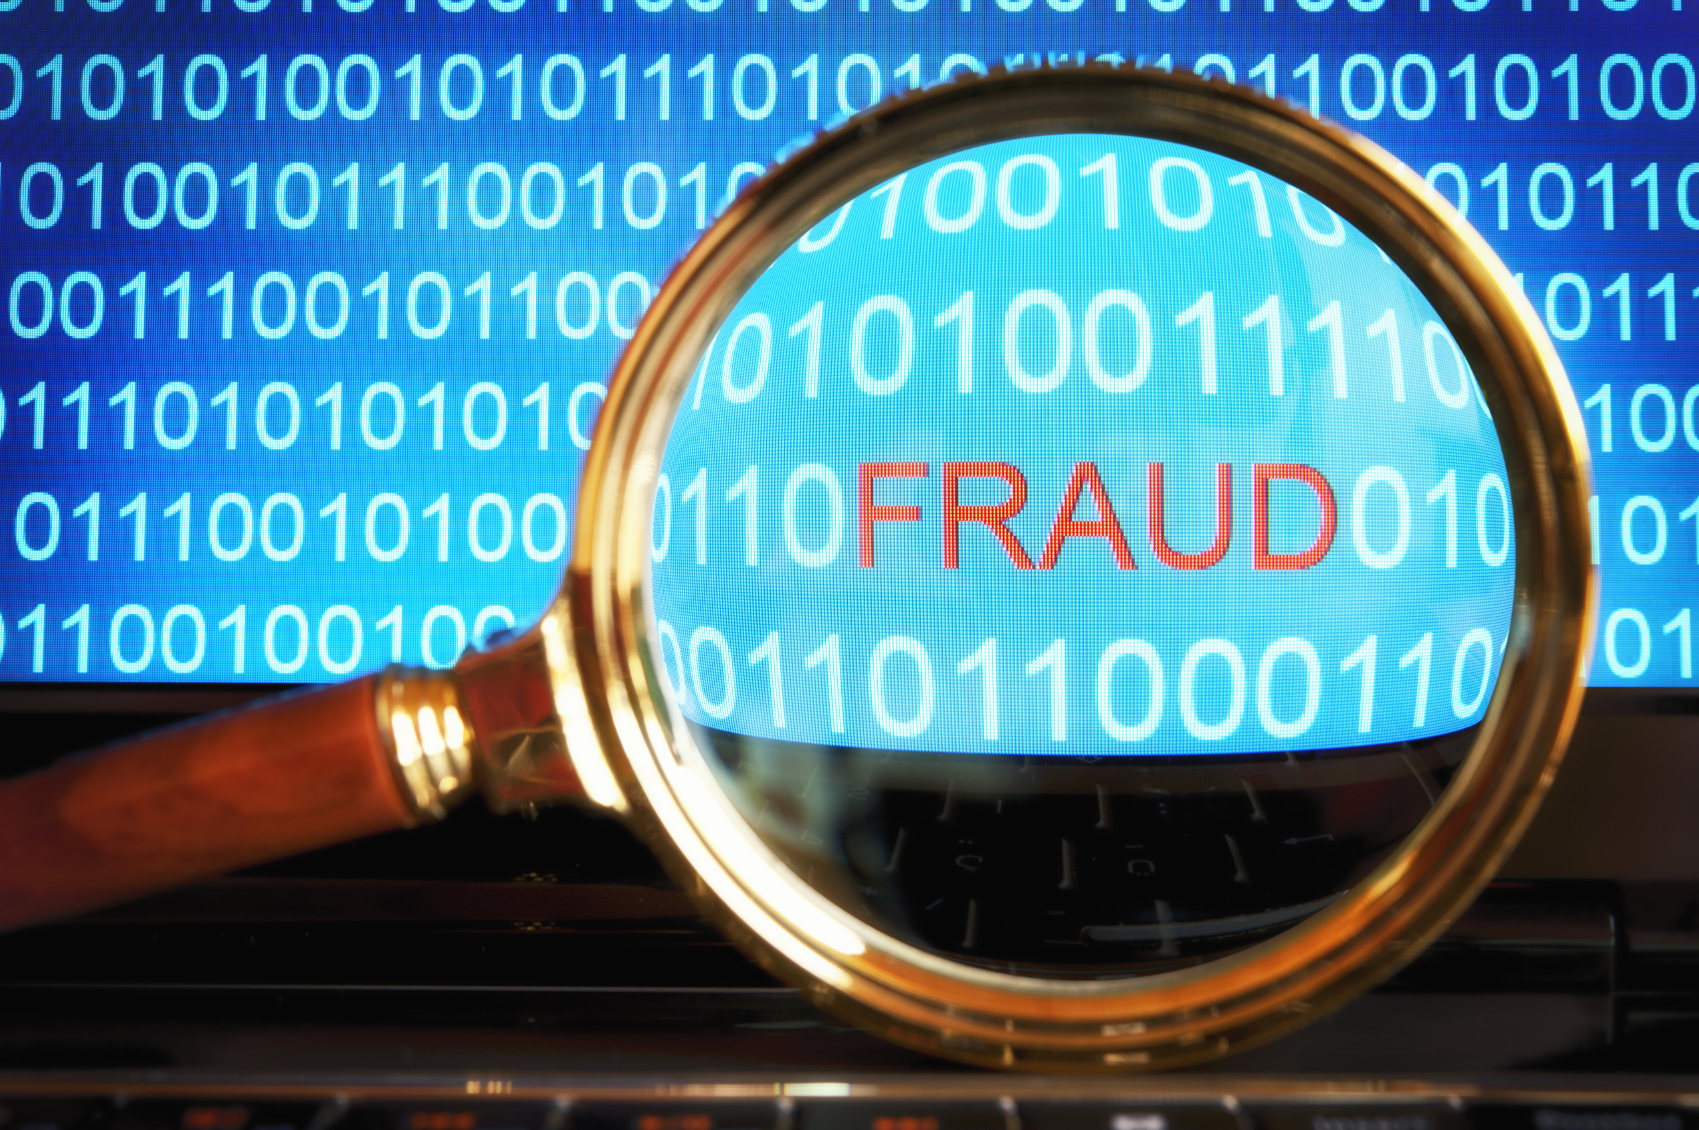 Protecting Your Loved One from Financial Fraud